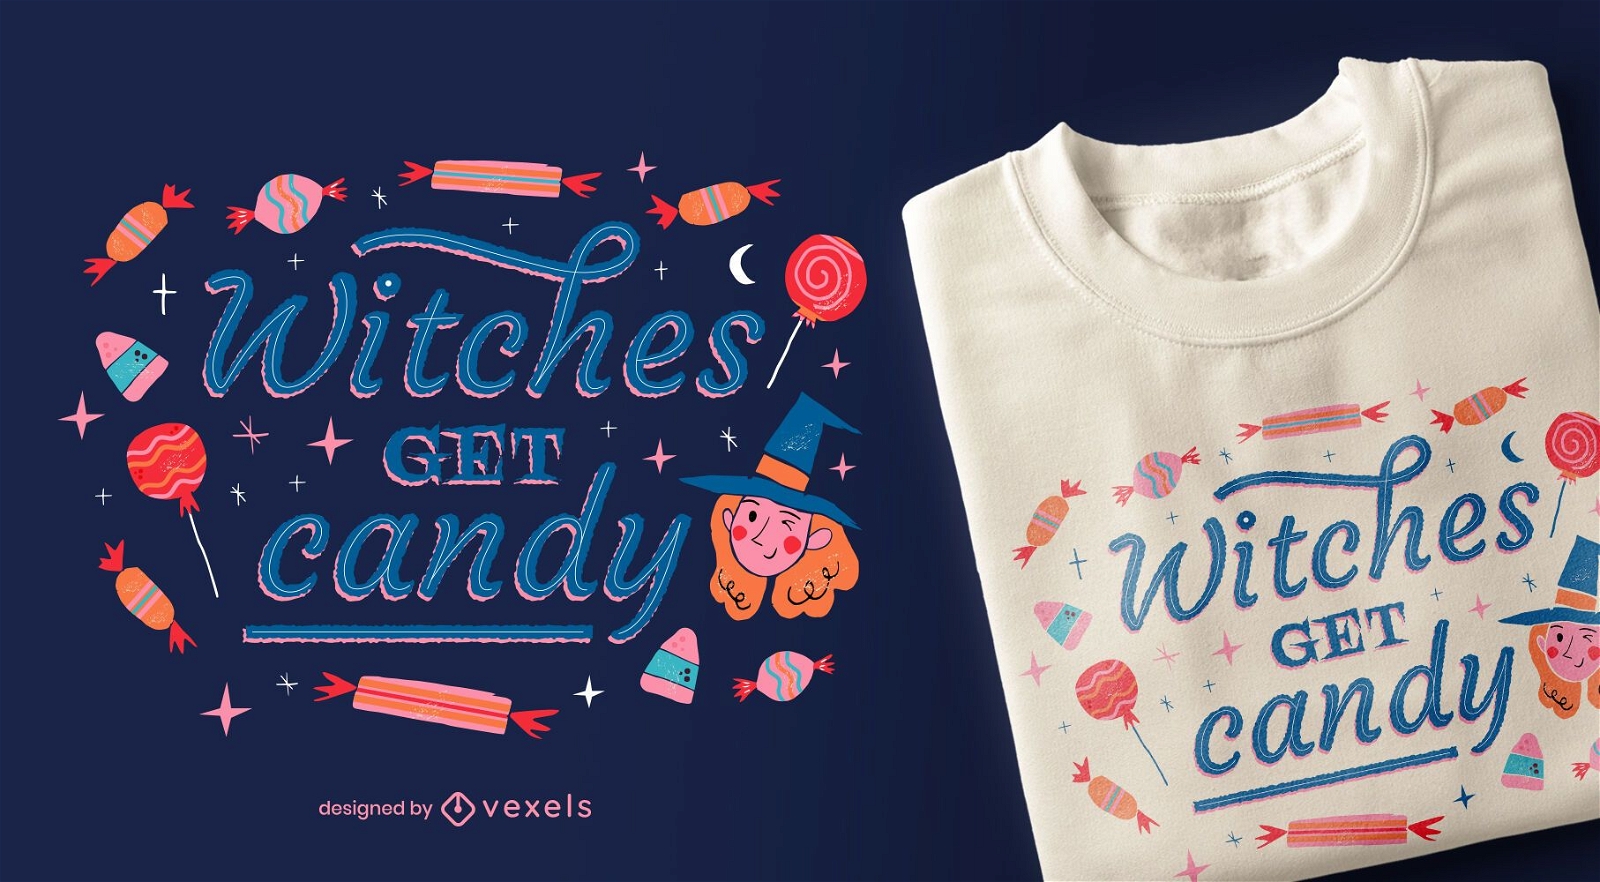 witches get candy t-shirt design